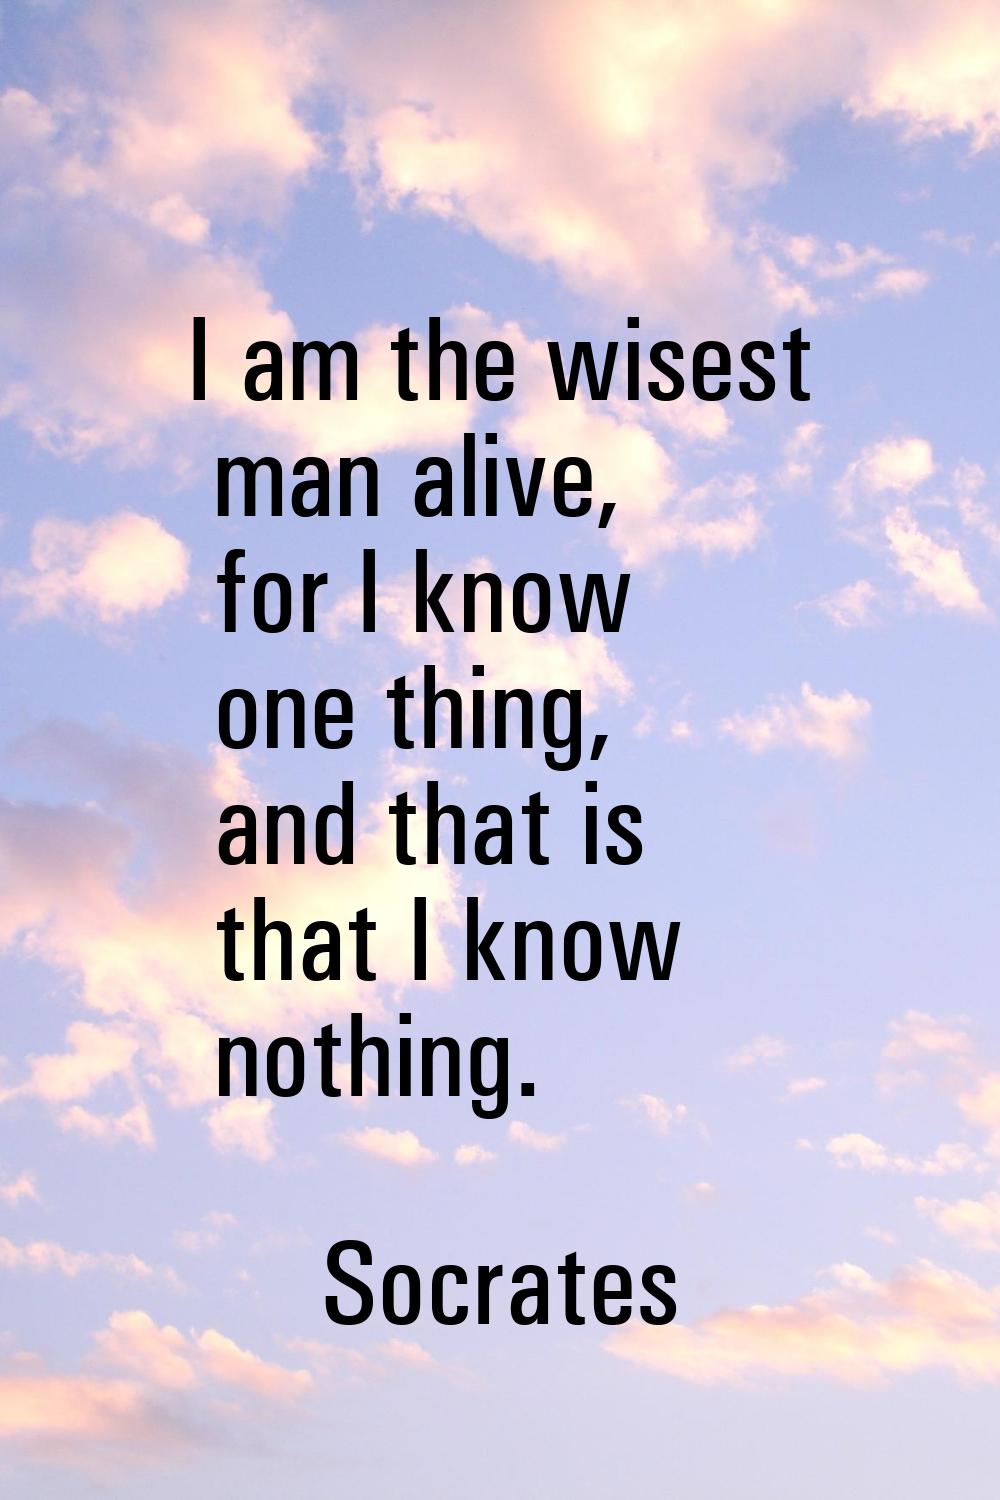 I am the wisest man alive, for I know one thing, and that is that I know nothing.